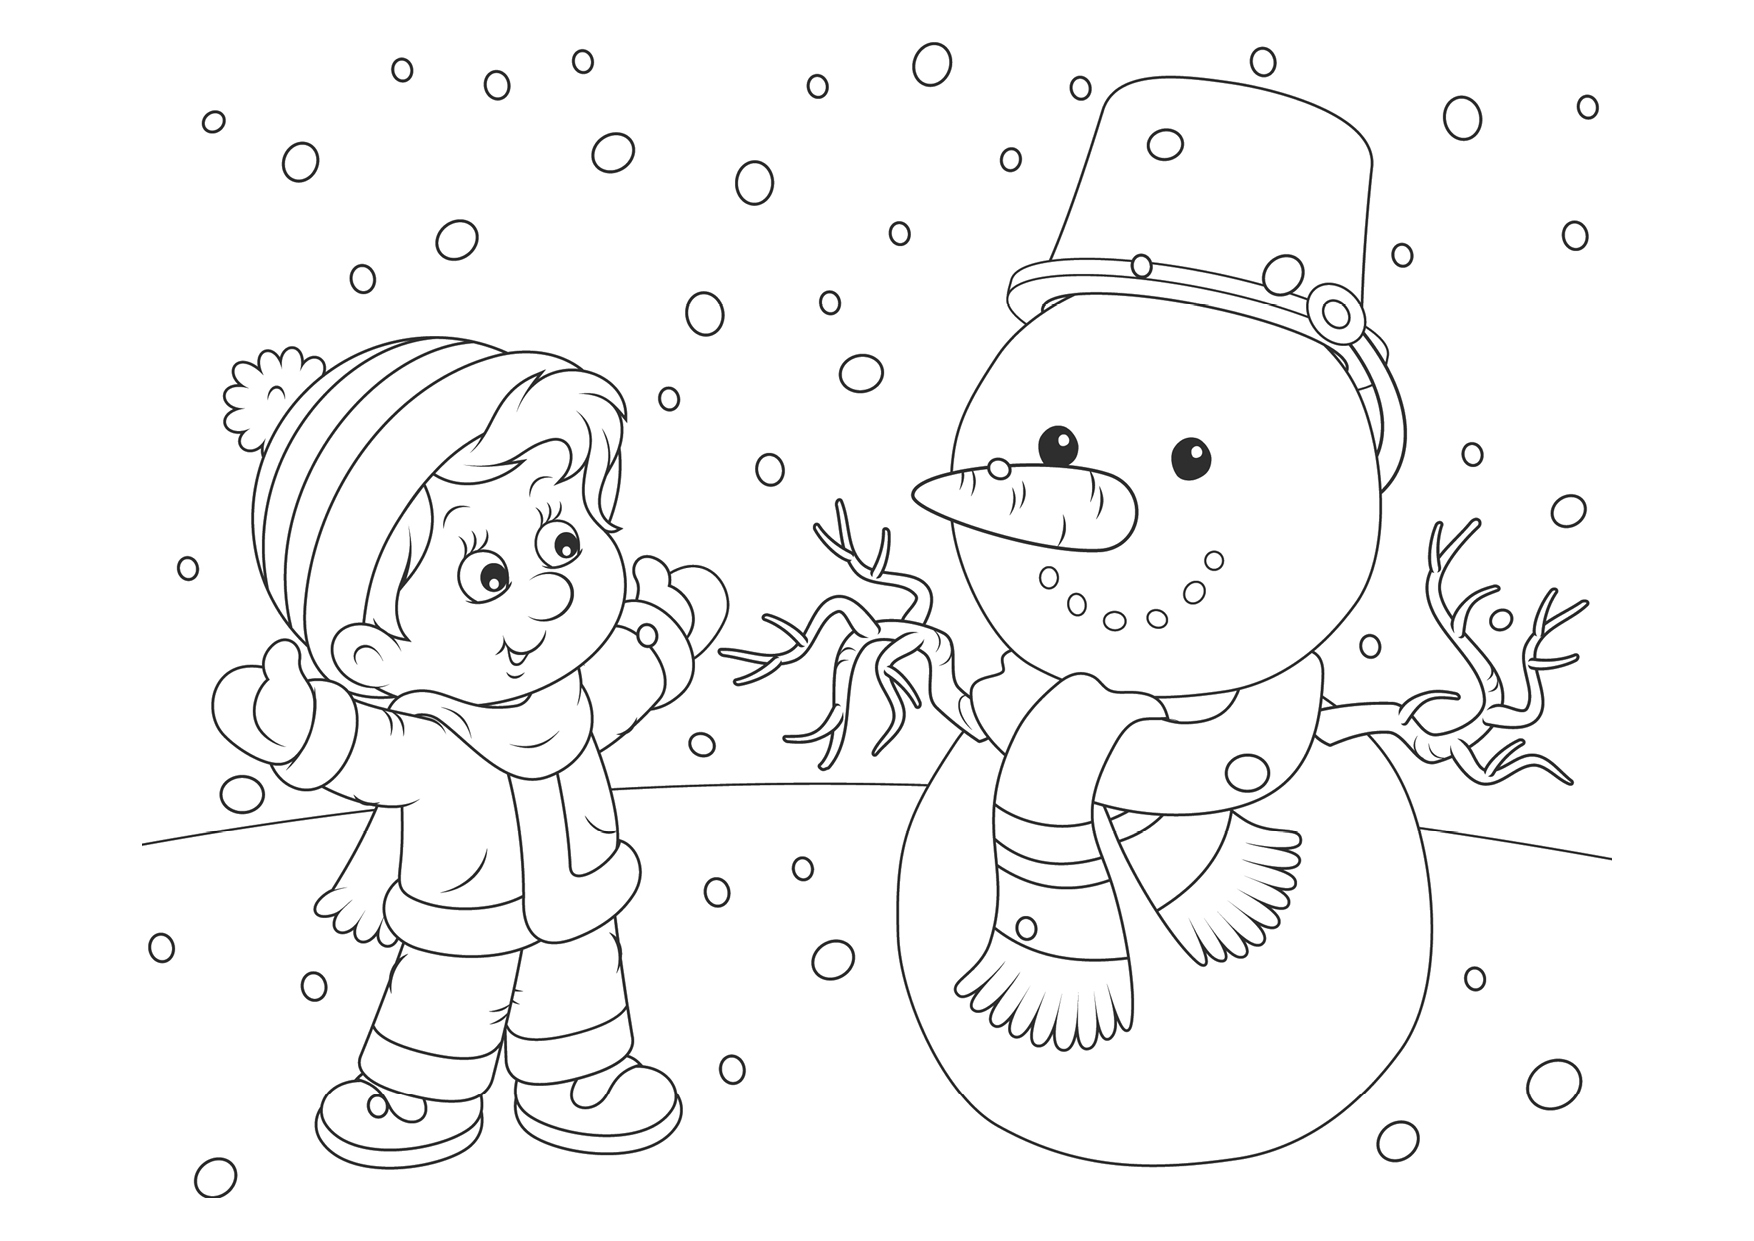 Kid and snowman